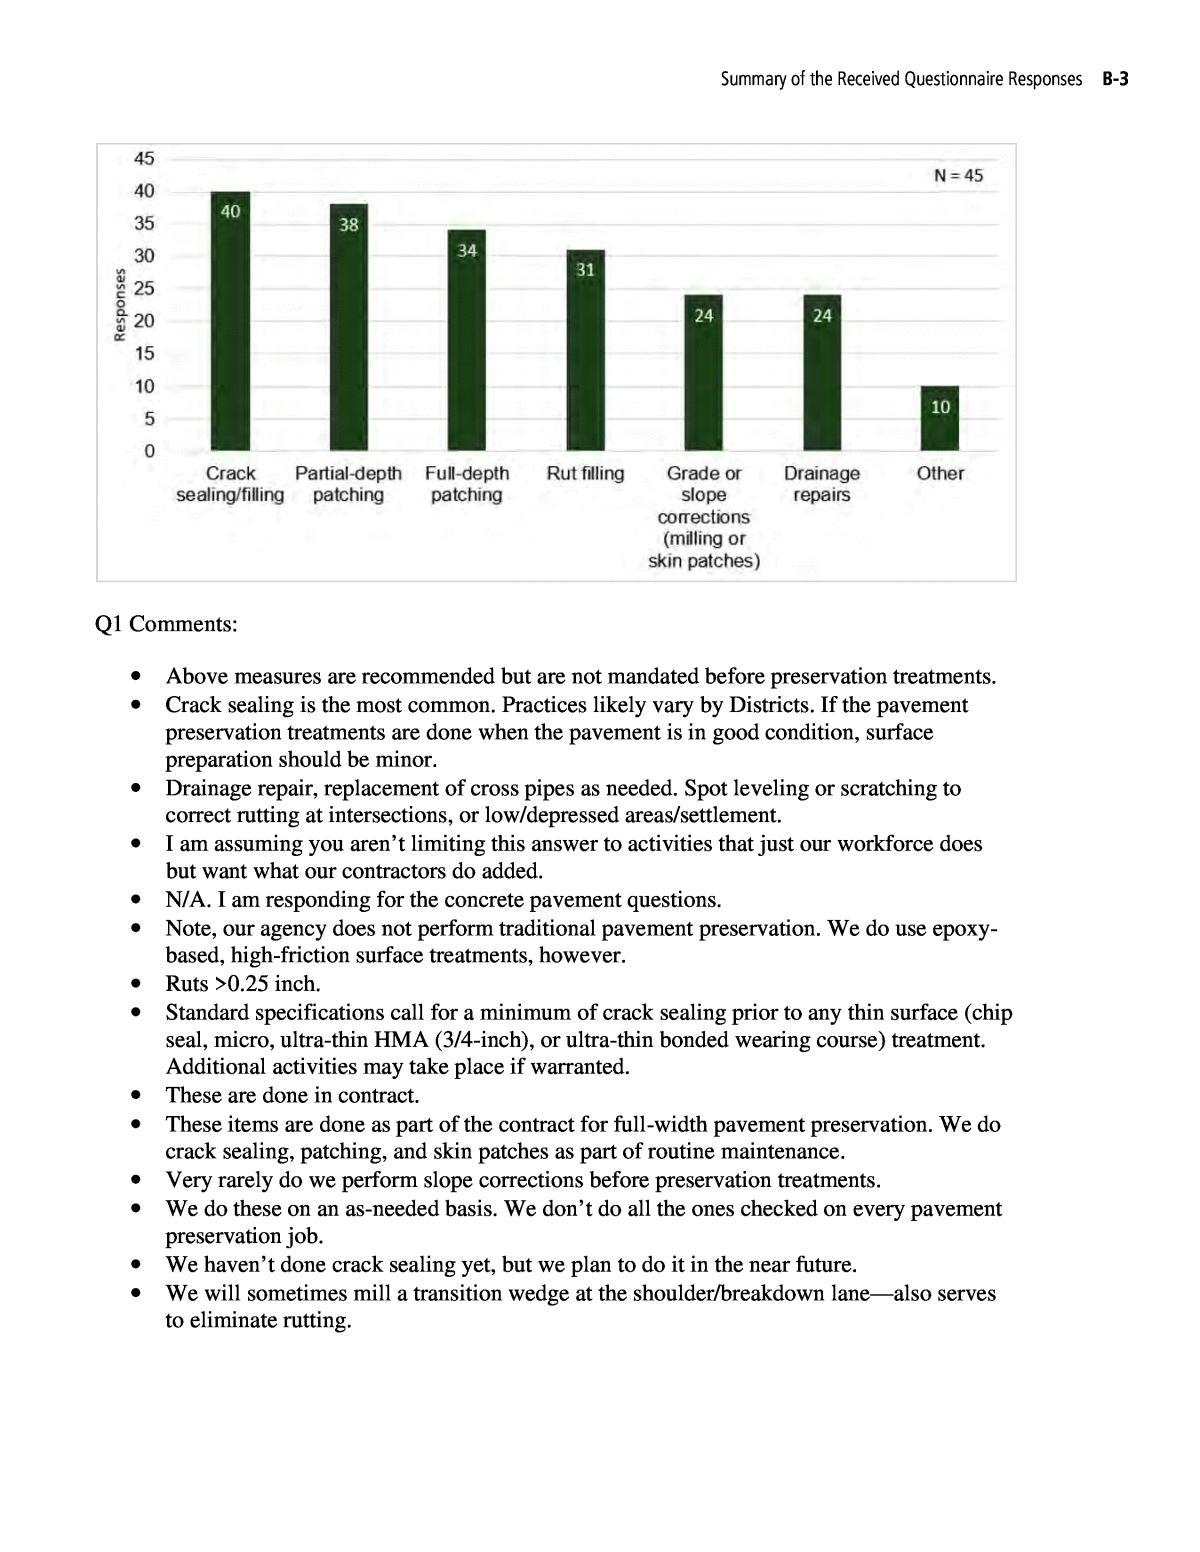 Appendix B - Summary of the Received Questionnaire Responses ...